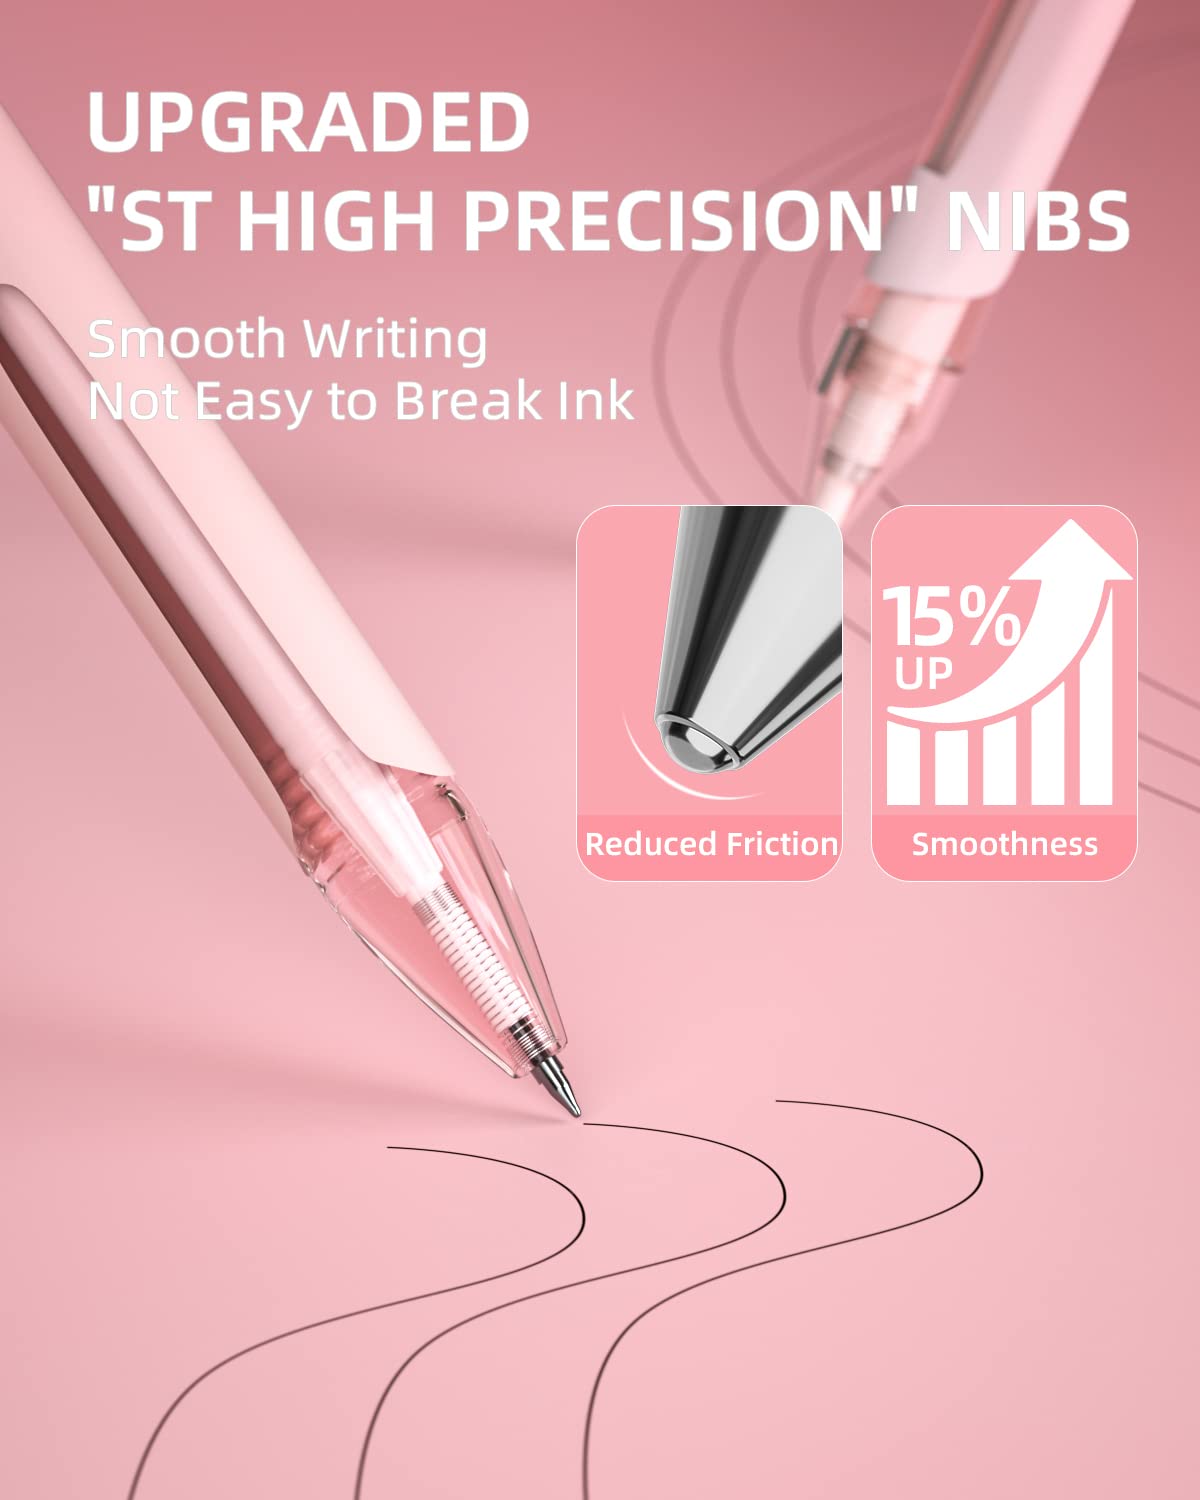 Gel Pens, Black Pens Fine Point Smooth Writing Pen 0.5mm Retractable, Best  Aesthetic Cute Pens for Journaling Note - AliExpress